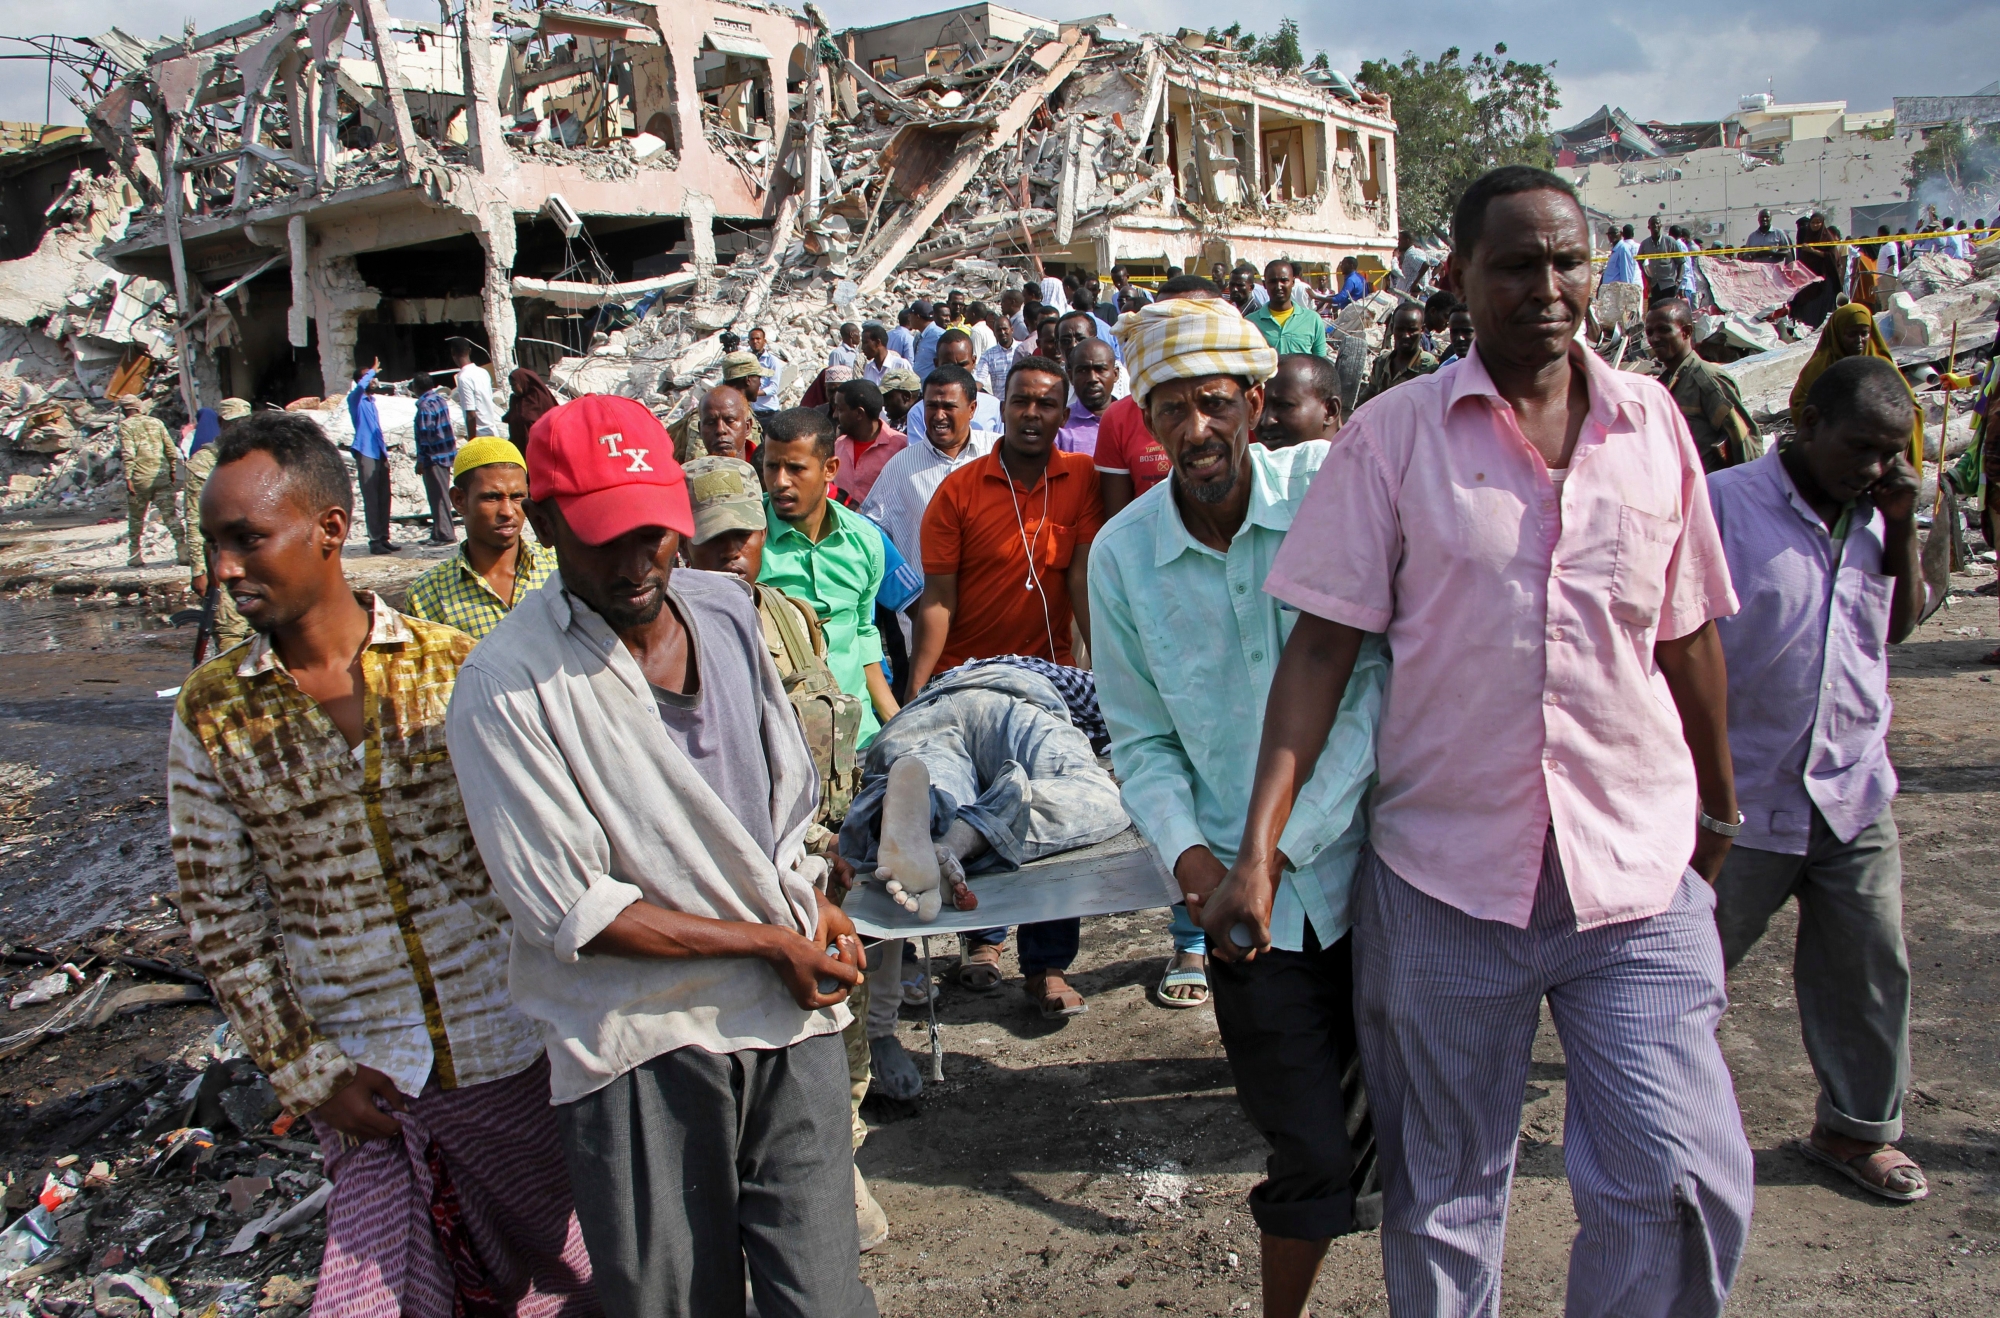 Somalis remove the body of a man killed in Saturday's blast, in Mogadishu, Somalia Sunday, Oct. 15, 2017. The death toll from the huge truck bomb blast in Somalia's capital rose to over 50 Sunday, with more than 60 others injured, as hospitals struggled to cope with the high number of casualties, security and medical sources said. (AP Photo/Farah Abdi Warsameh) Somalia Explosion